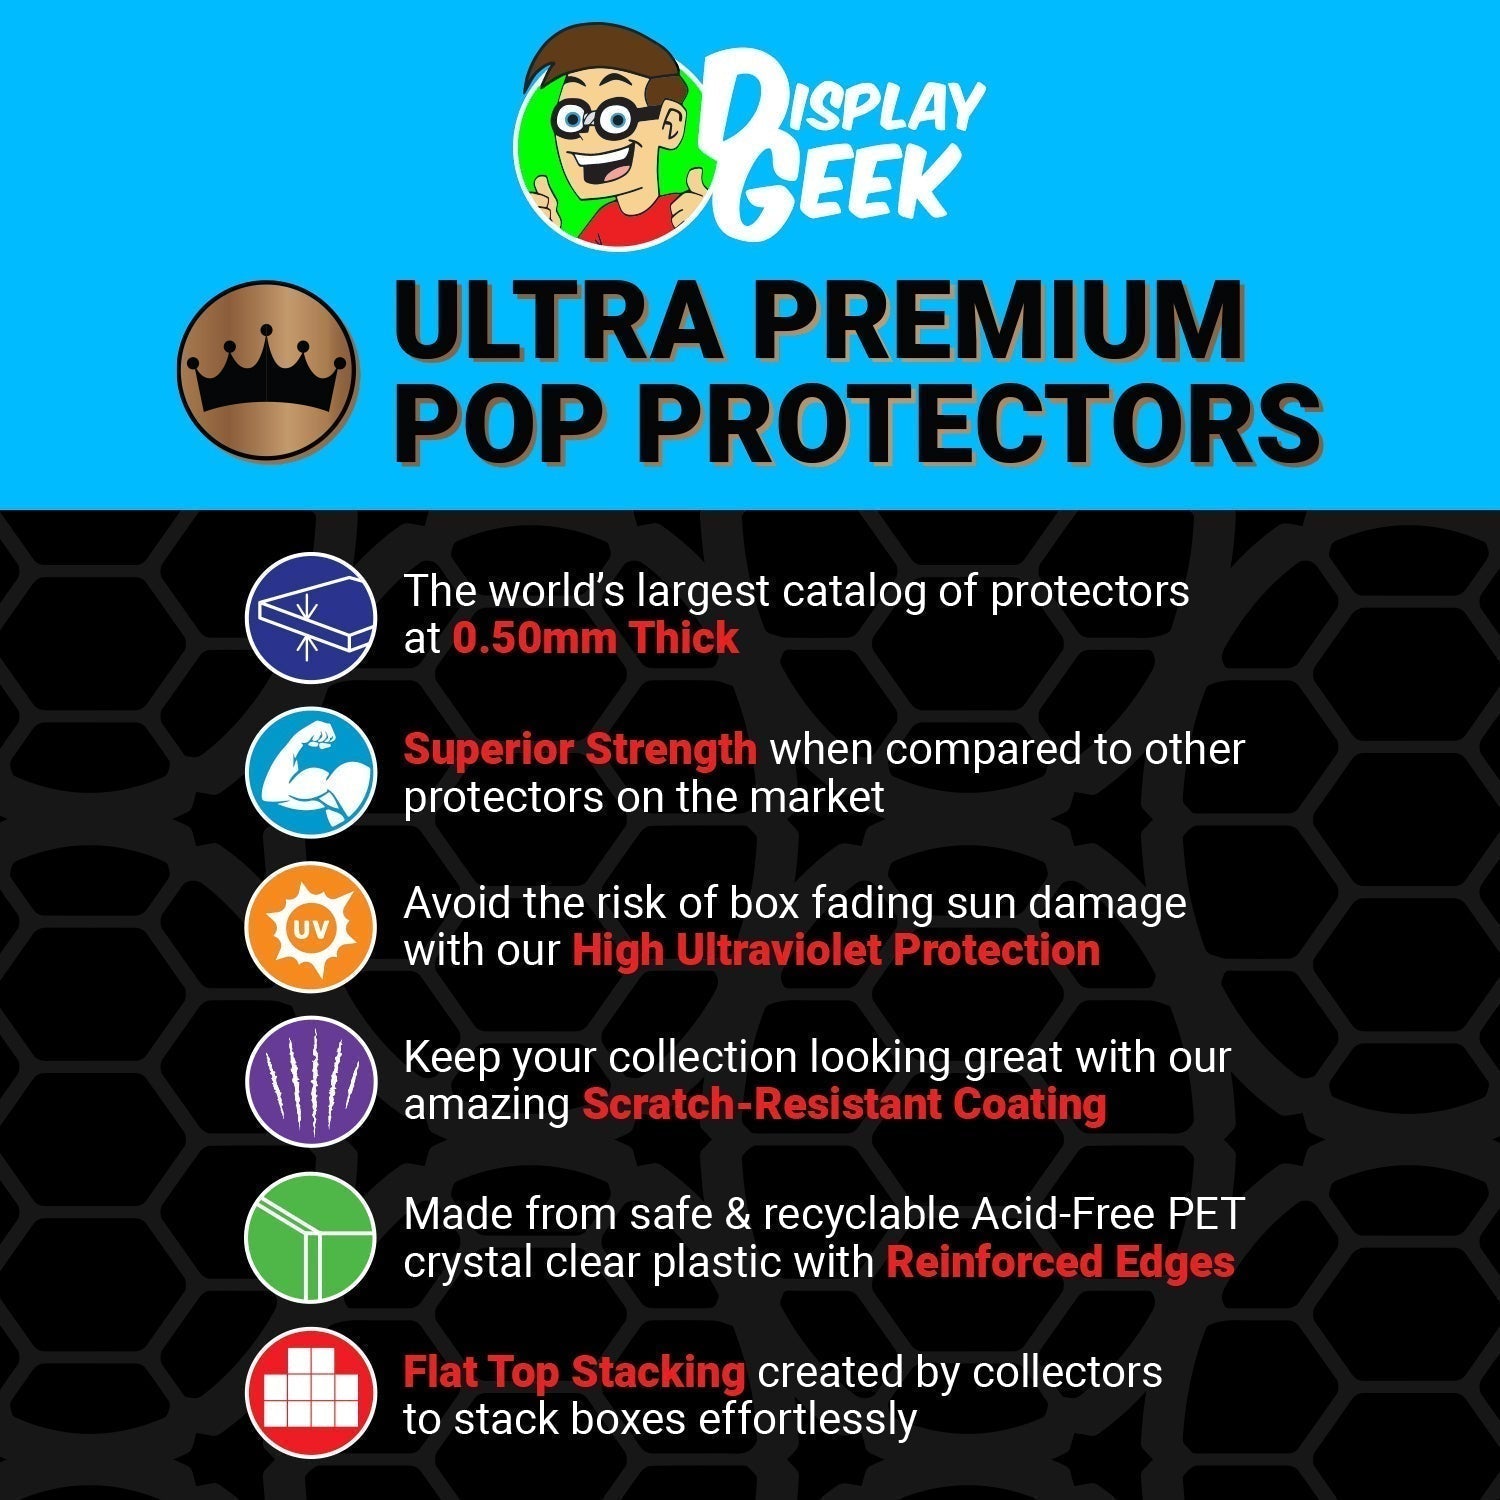 Pop Protector for Funkoverse Golden Girls Sophia & Dorothy 101 Funko 2 Pack - PPG Pop Protector Guide Search Created by Display Geek